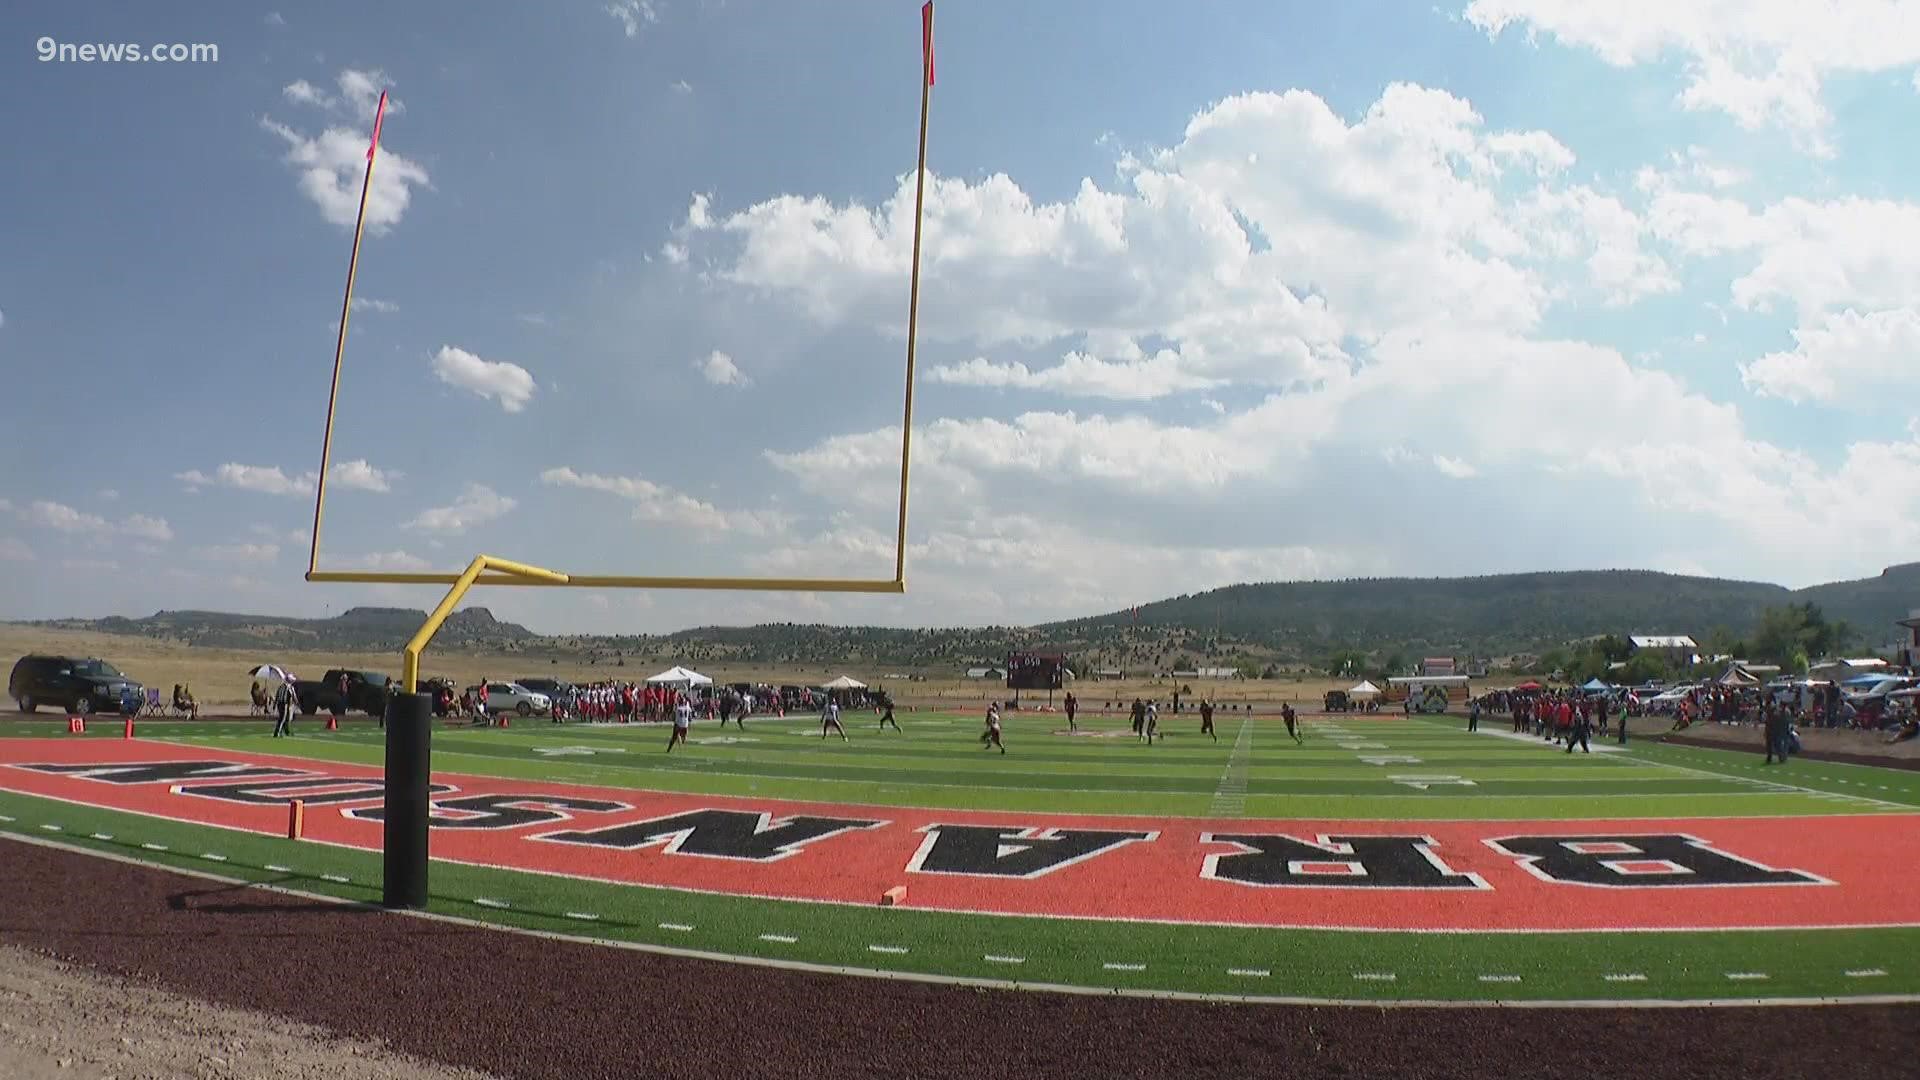 Branson may have the nicest high school football field in Colorado. The team's new field replaces its old pasture, after opponents said they wouldn't play there.